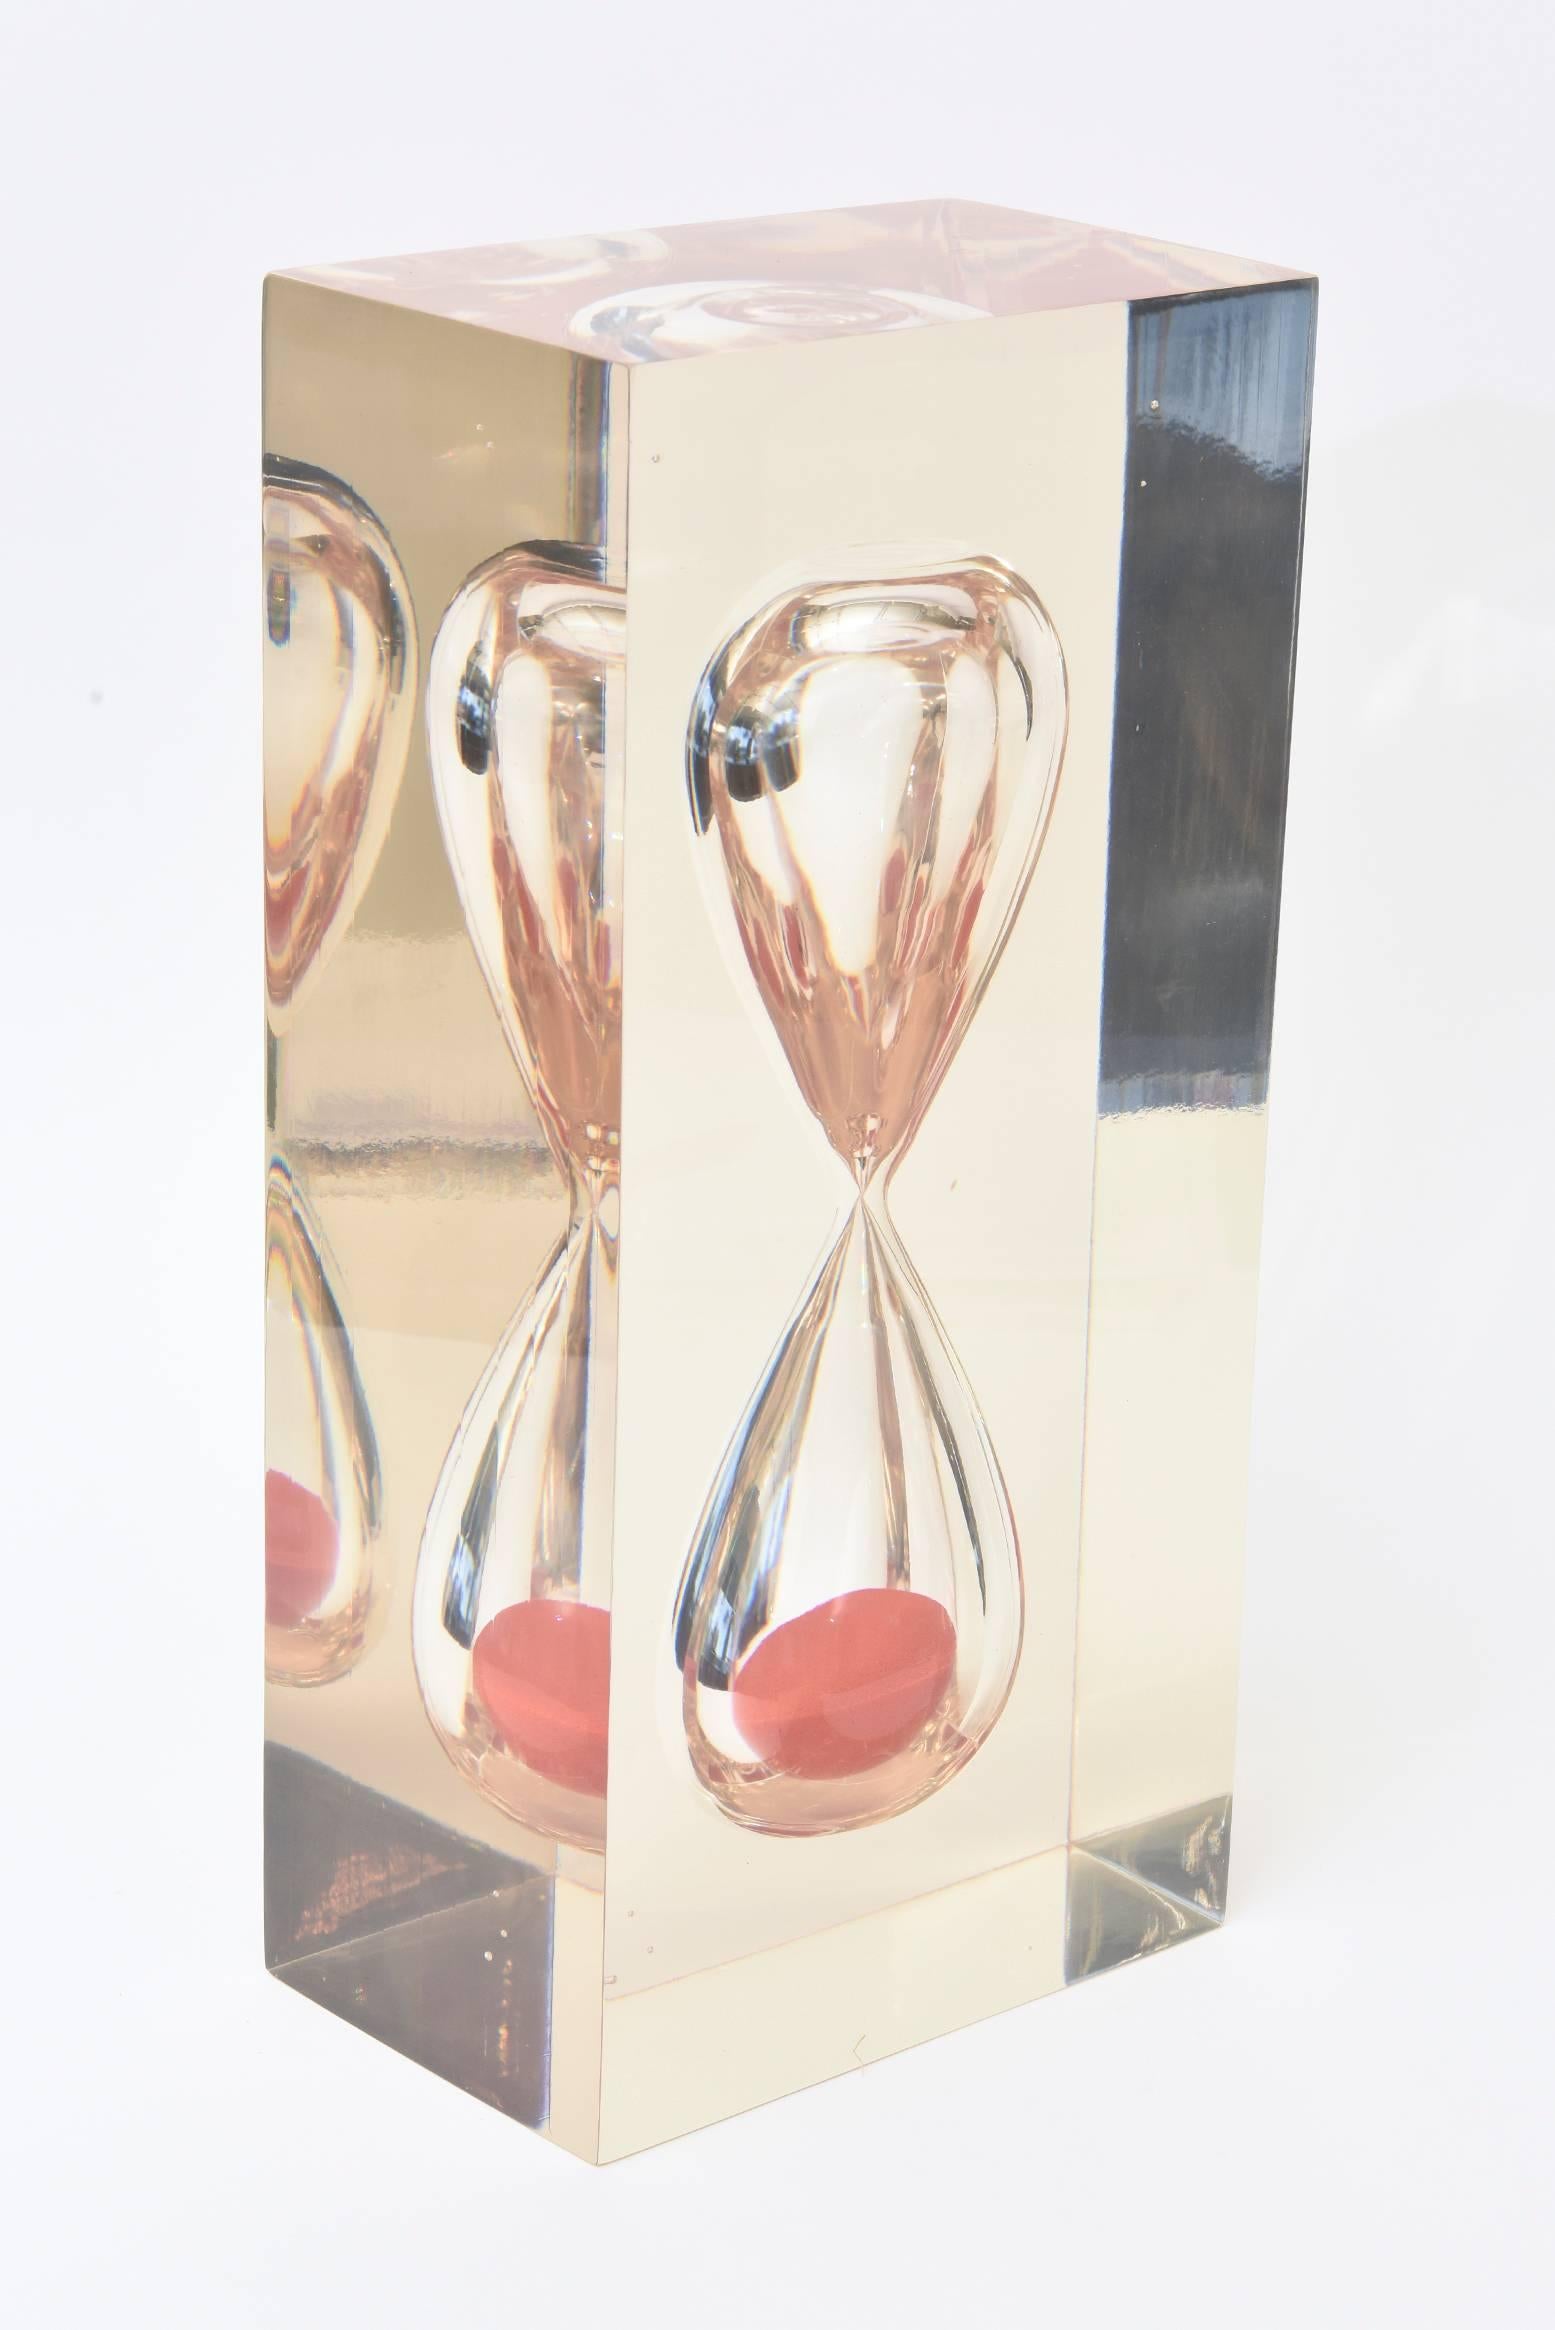 This fantastic vintage French encased large Lucite hourglass object /sculpture is mesmerizing. The orange sand adds punch. It is heavy and substantial and amazing. It is from the 1970s and the Lucite has been polished to the best it can be.
It is